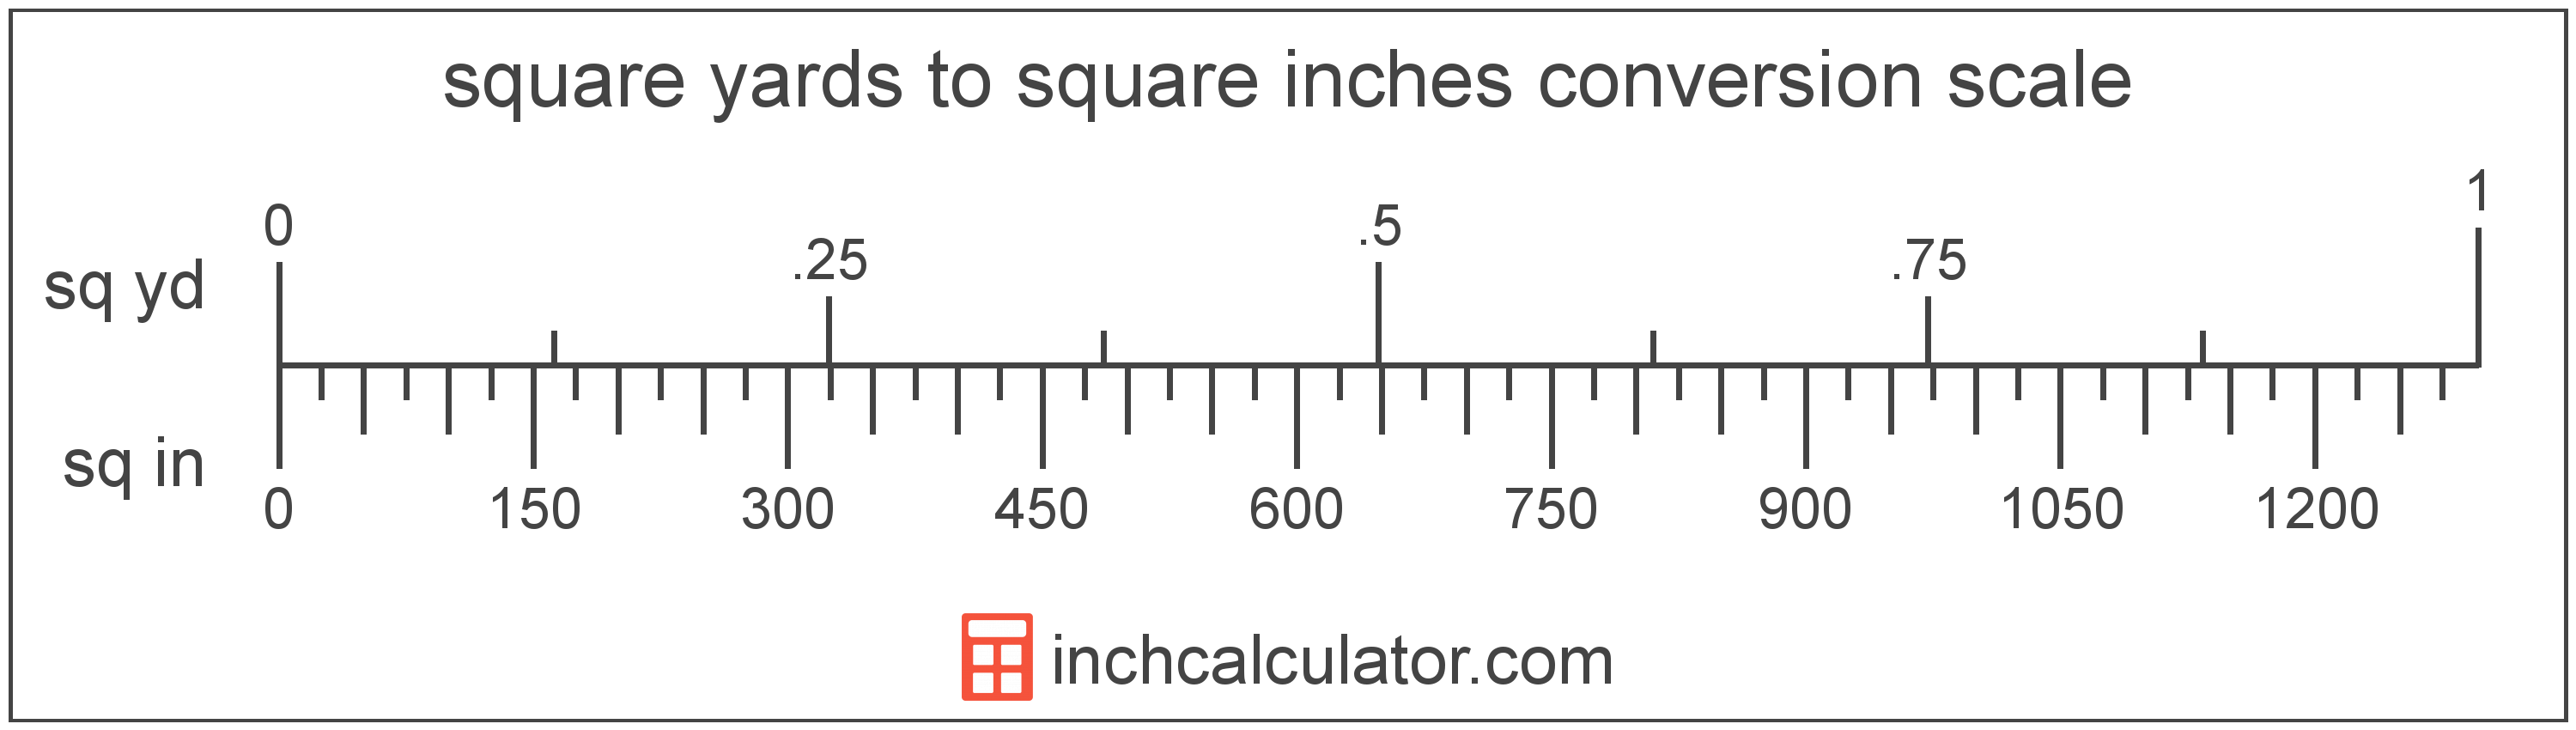 conversion scale showing square inches and equivalent square yards area values